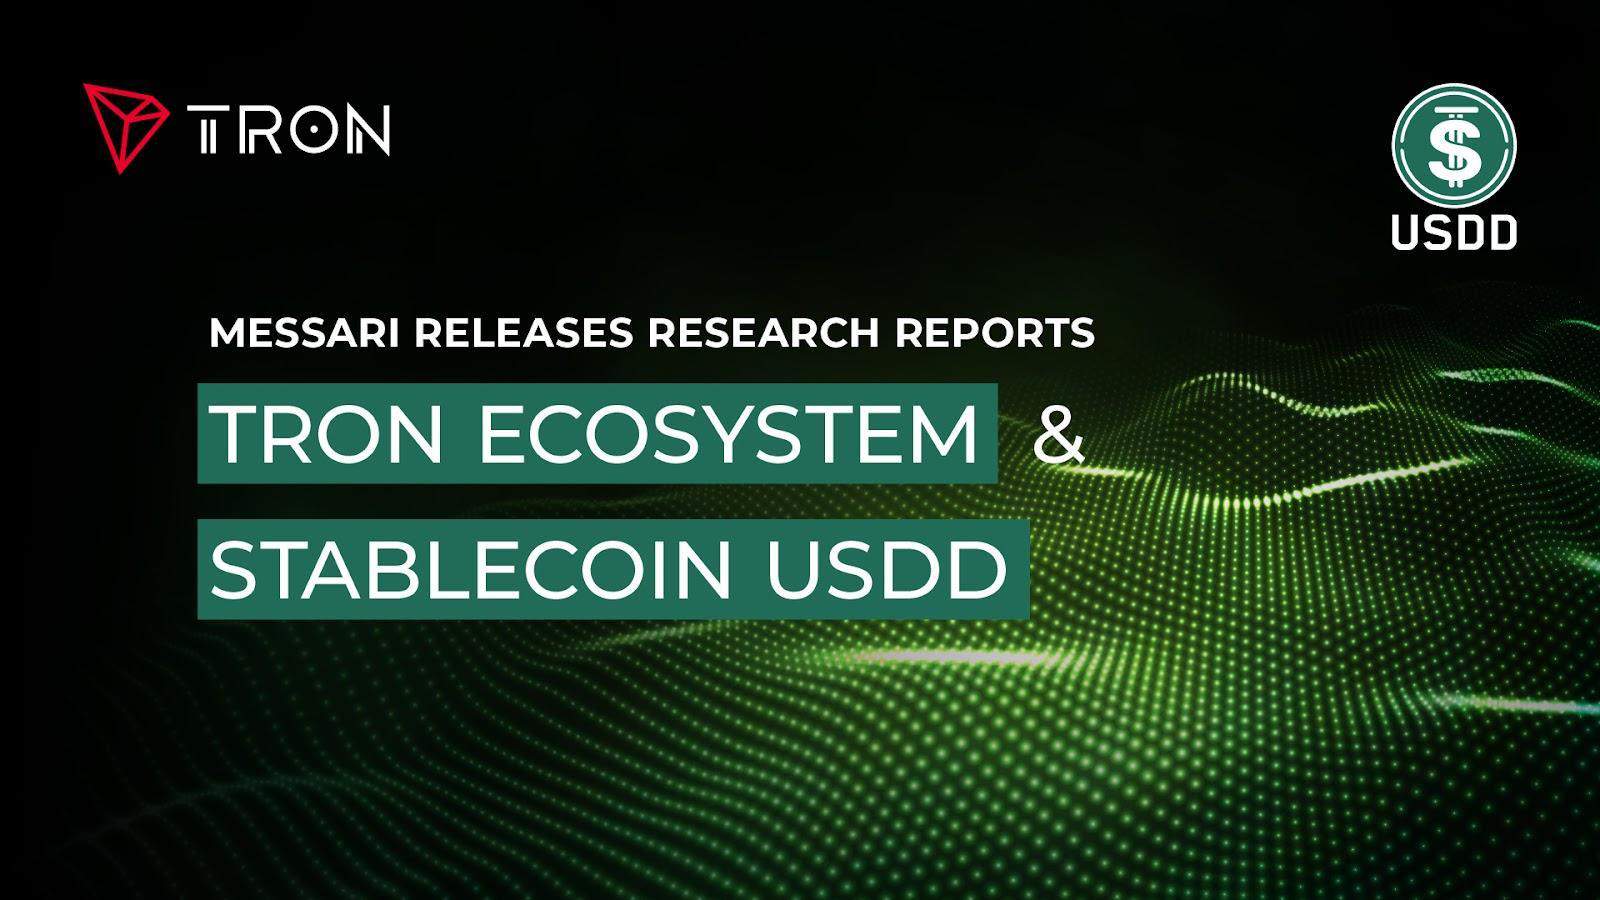 Messari-releases-research-reports-on-the-tron-ecosystem-and-the-stablecoin-usdd